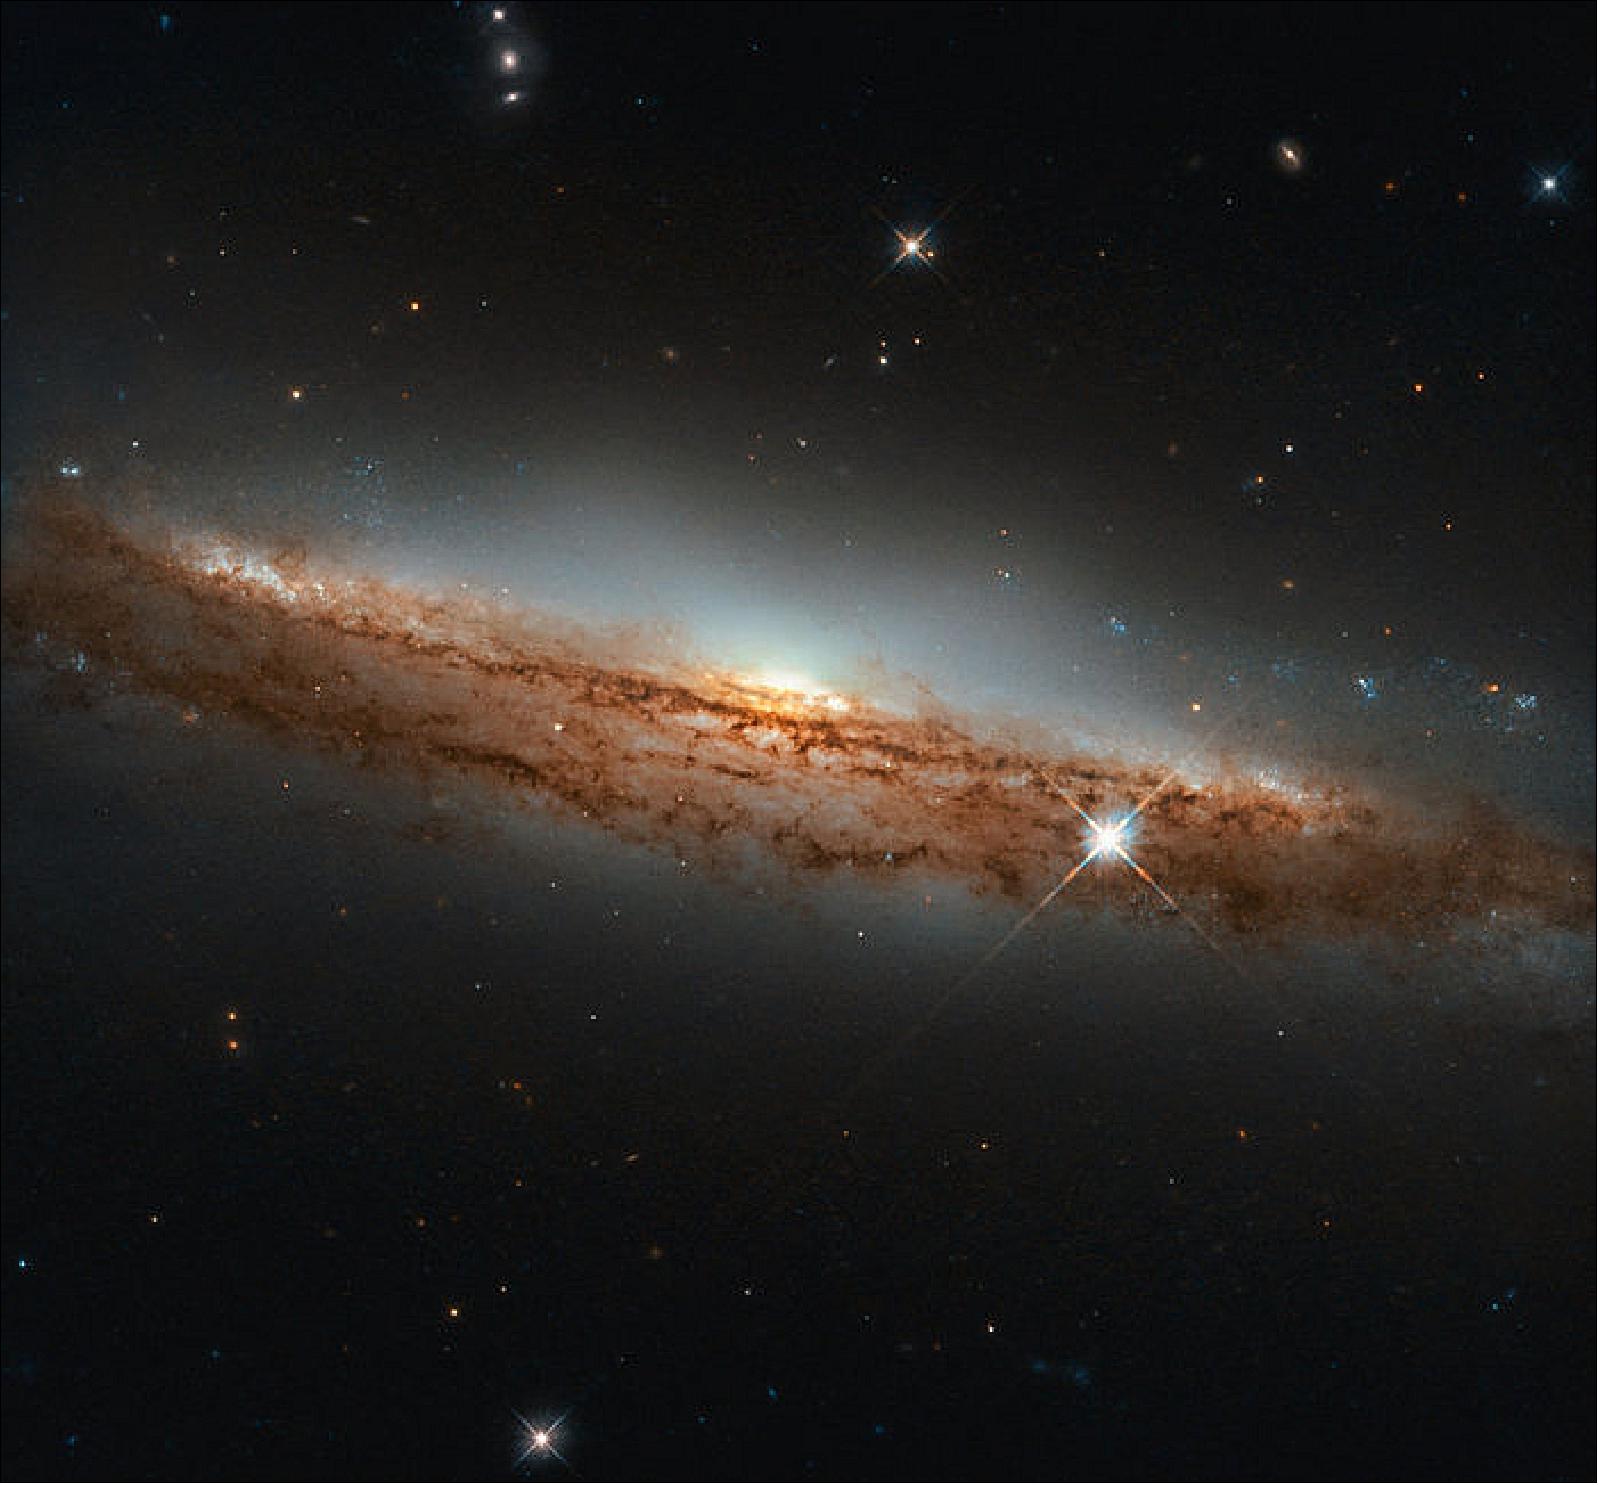 Figure 20: Seeing a spiral almost in profile, as Hubble has here, can provide a vivid sense of its three-dimensional shape. Through most of their expanse, spiral galaxies are shaped like a thin pancake. At their cores, though, they have bright, spherical, star-filled bulges that extend above and below this disc, giving these galaxies a shape somewhat like that of a flying saucer when they are seen edge-on (image credit: ESA/Hubble & NASA, D. Rosario; CC BY 4.0)